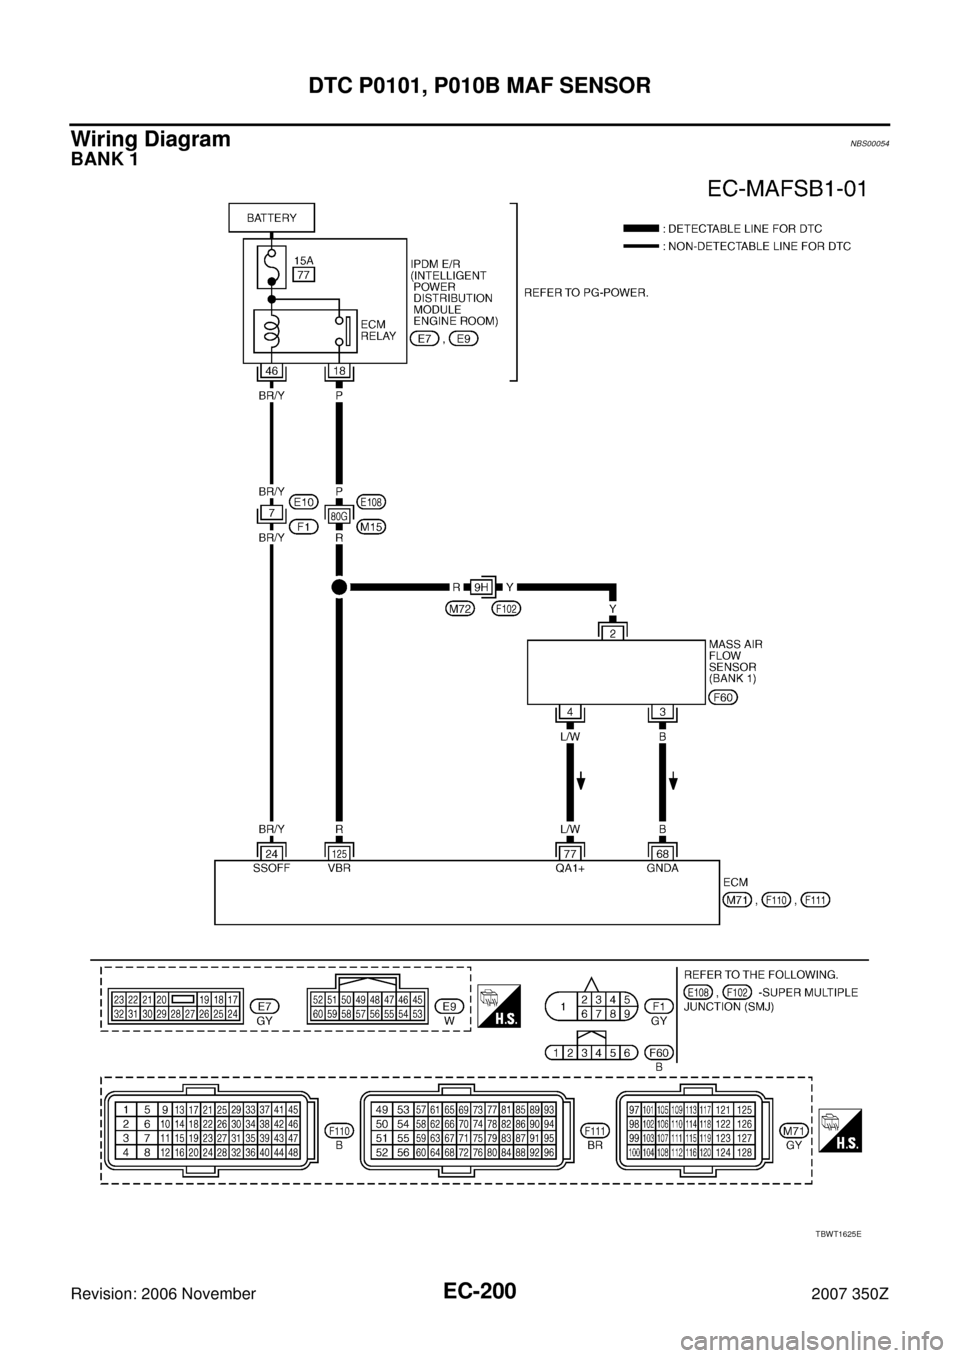 NISSAN 350Z 2007 Z33 Engine Control Owners Manual EC-200
DTC P0101, P010B MAF SENSOR
Revision: 2006 November2007 350Z
Wiring DiagramNBS00054
BANK 1
TBWT1625E 